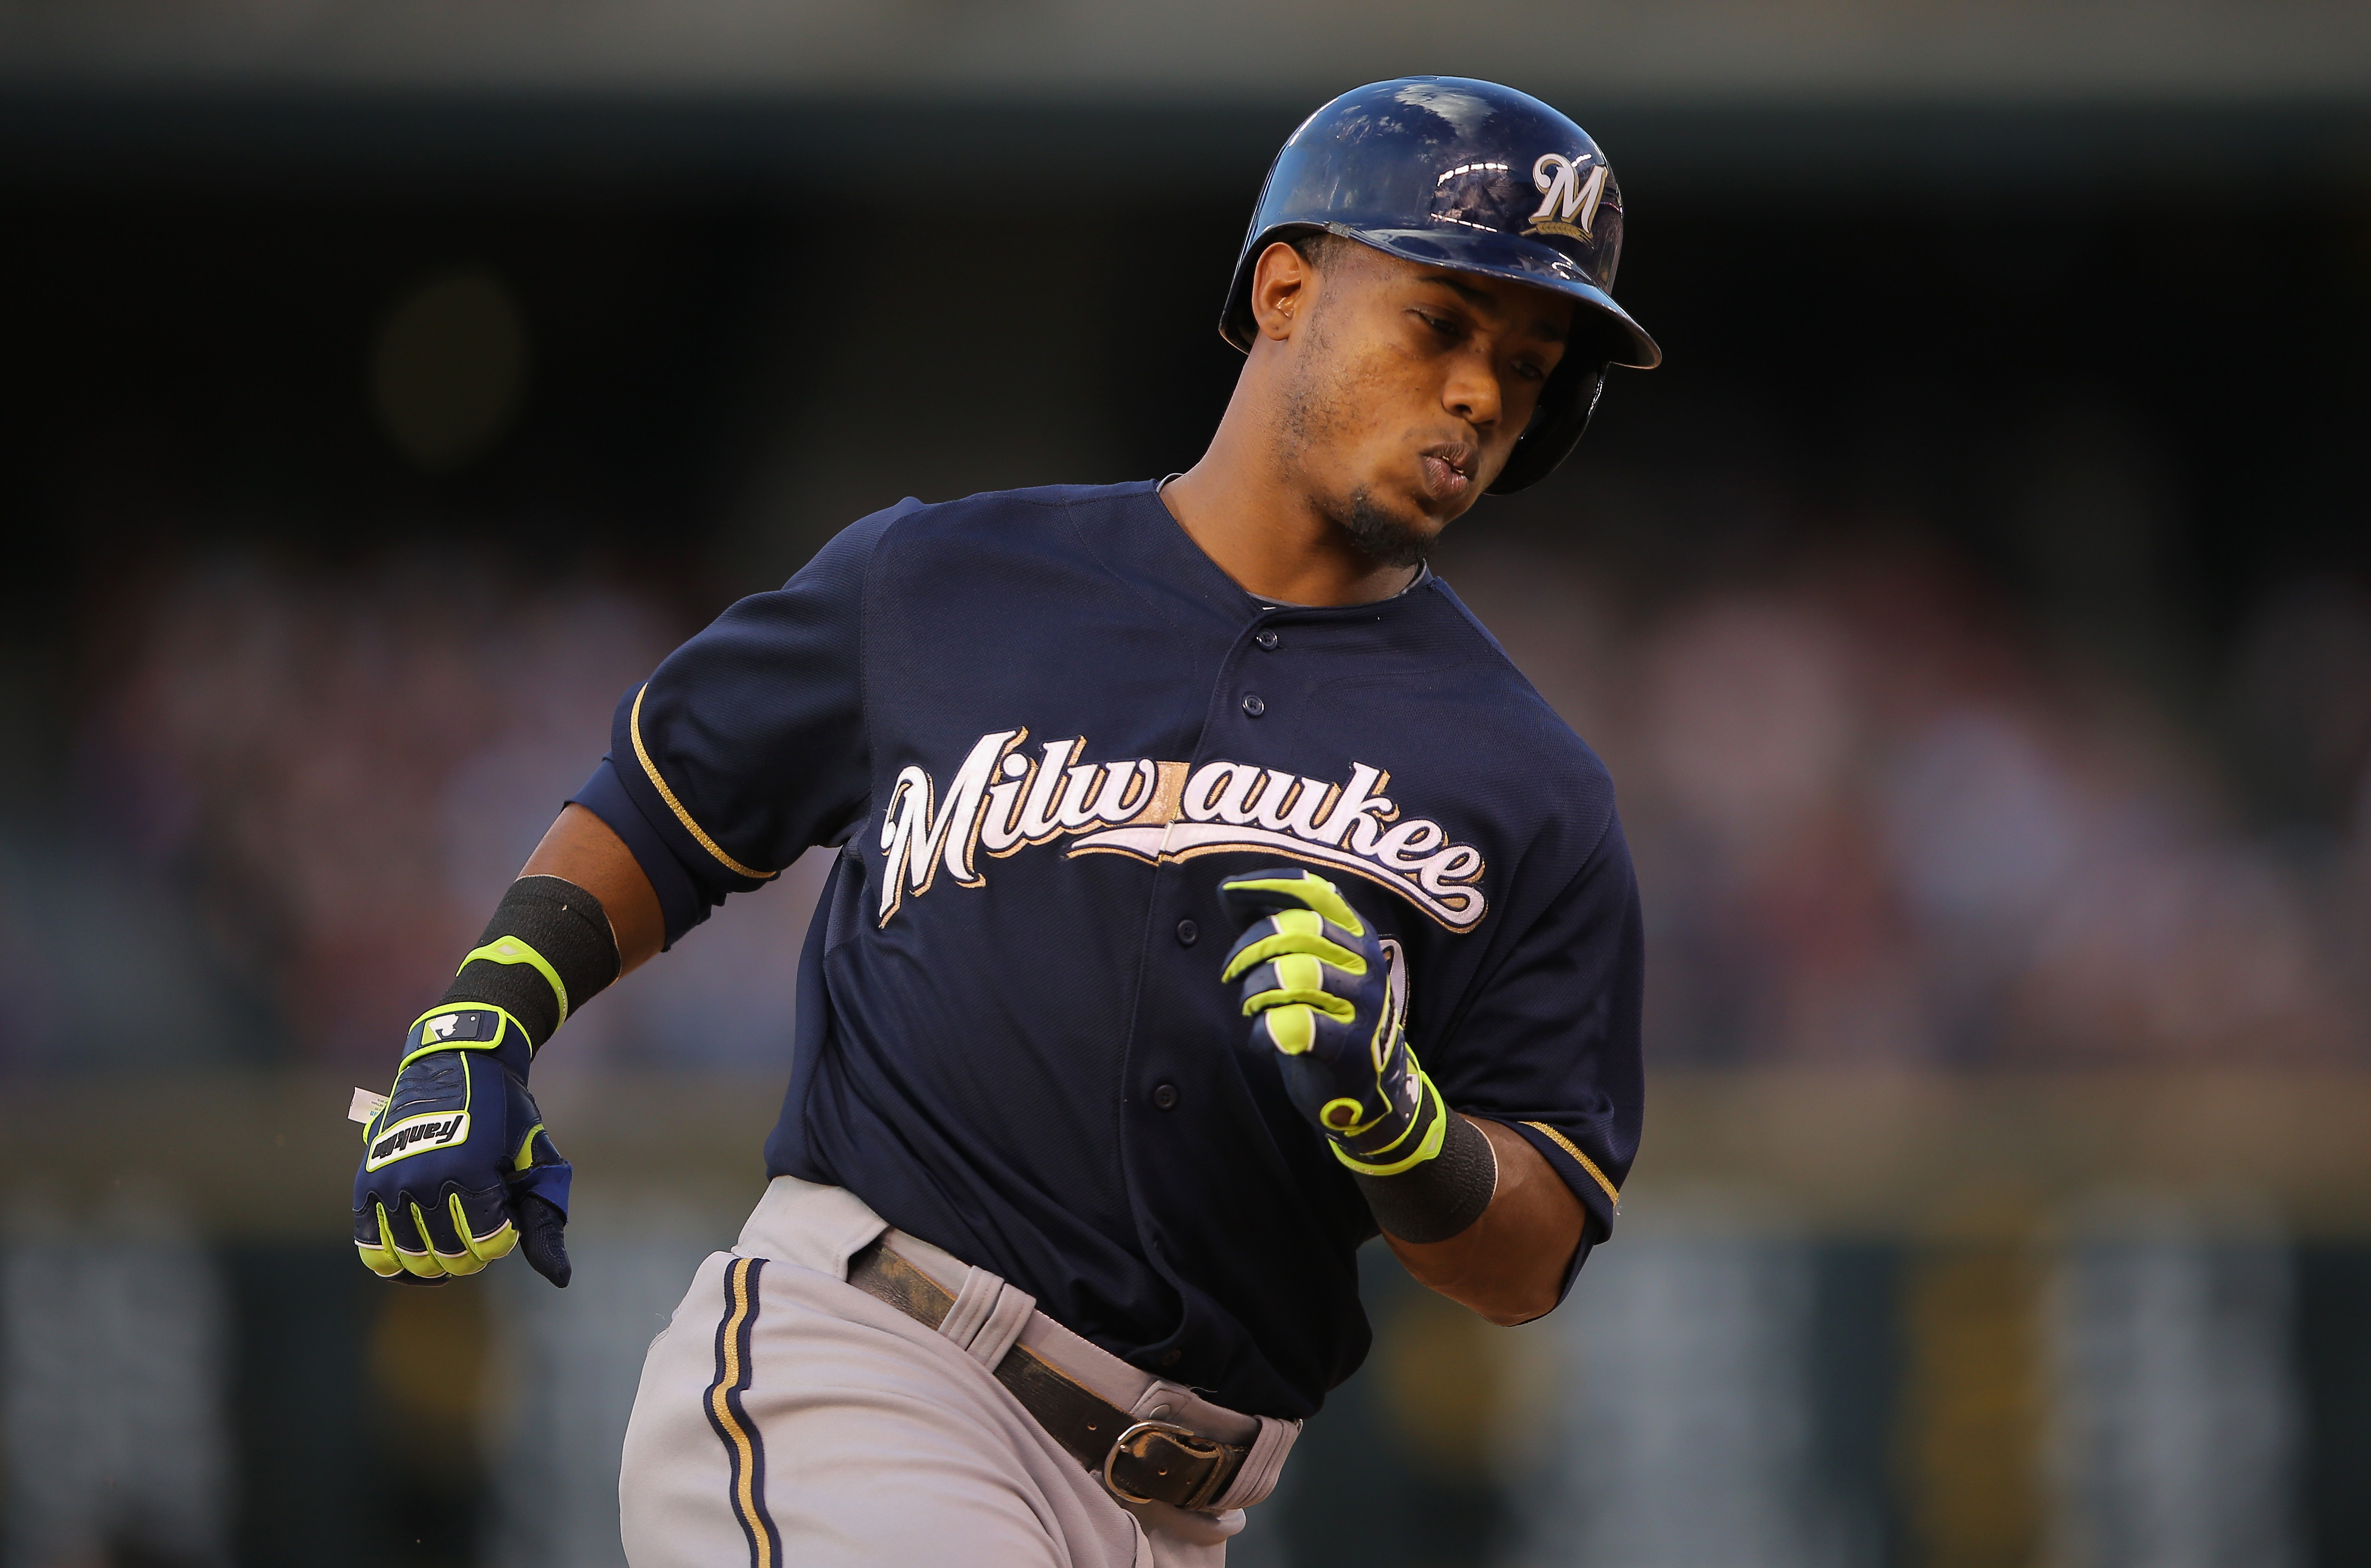 Brewers shortstop takes leave after son's death